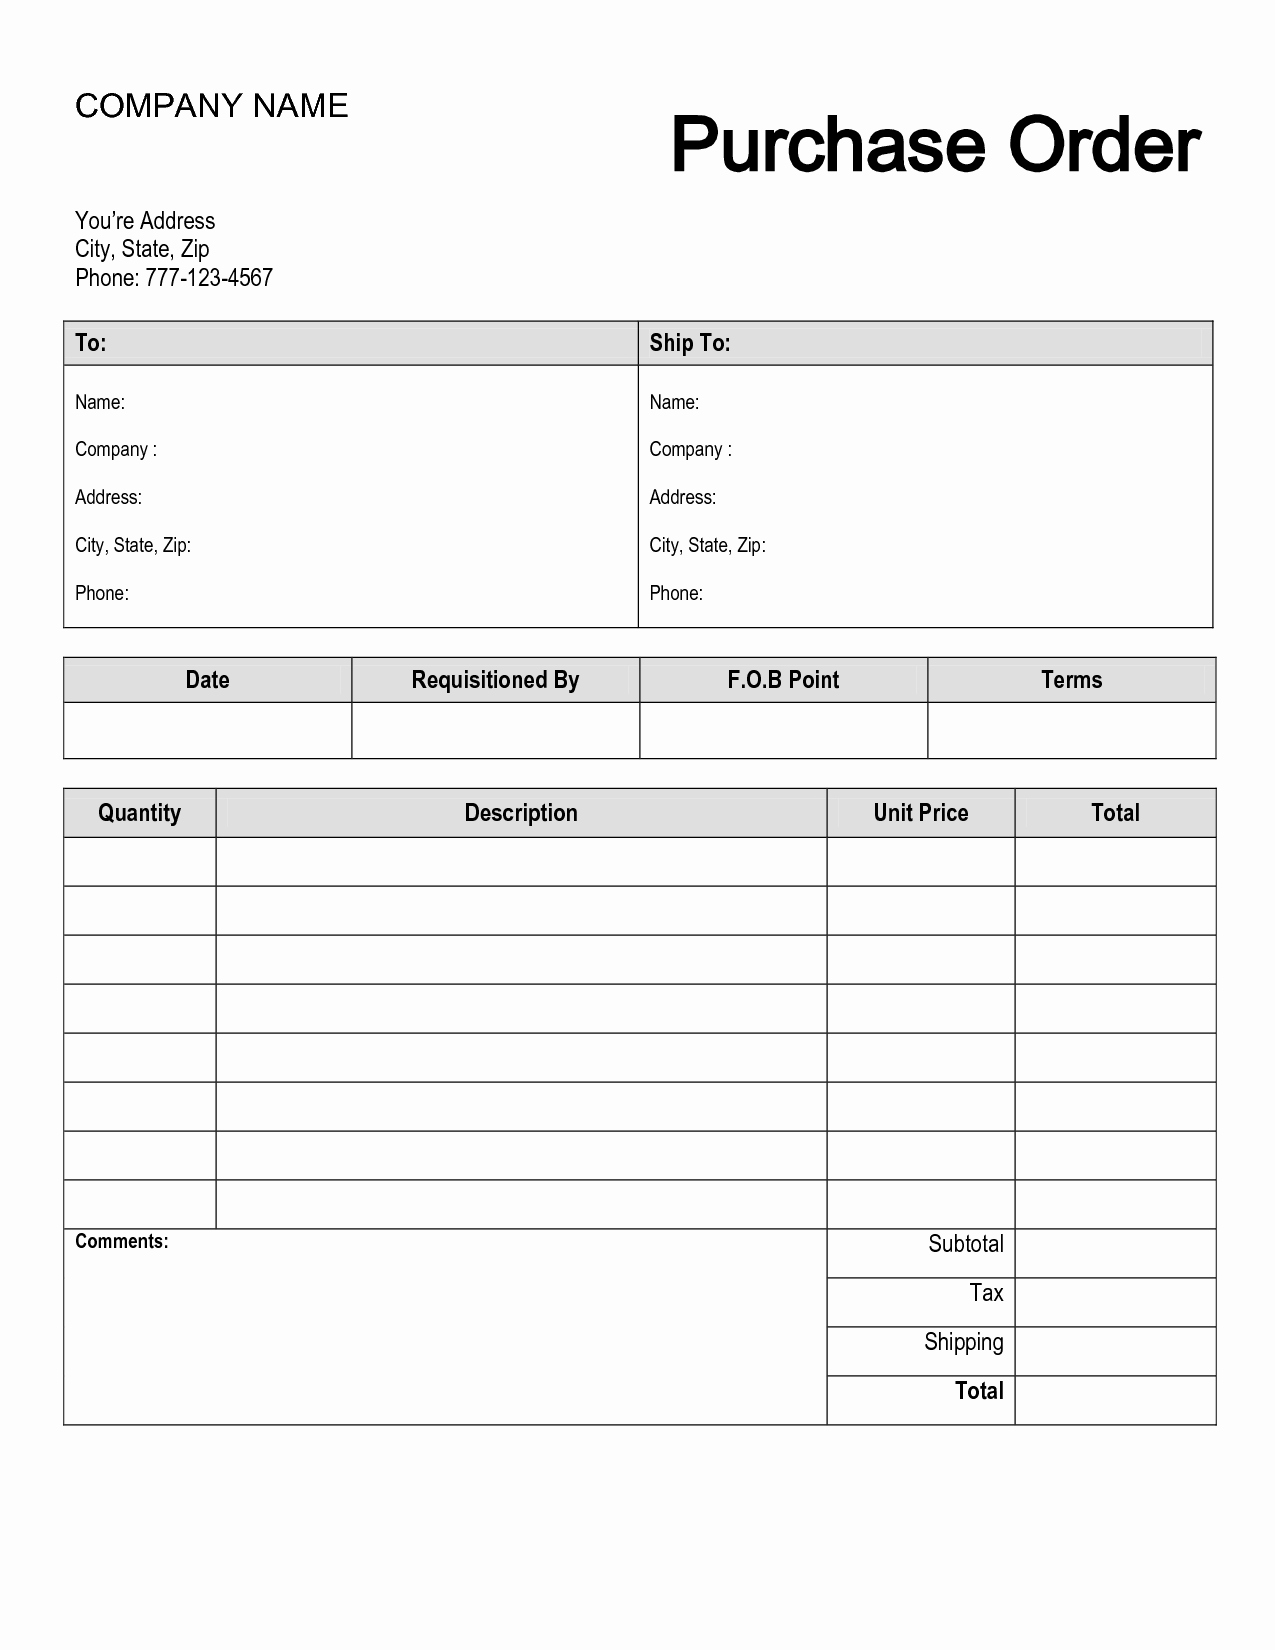 Sale order form Template Awesome Free Printable Purchase order form Purchase order